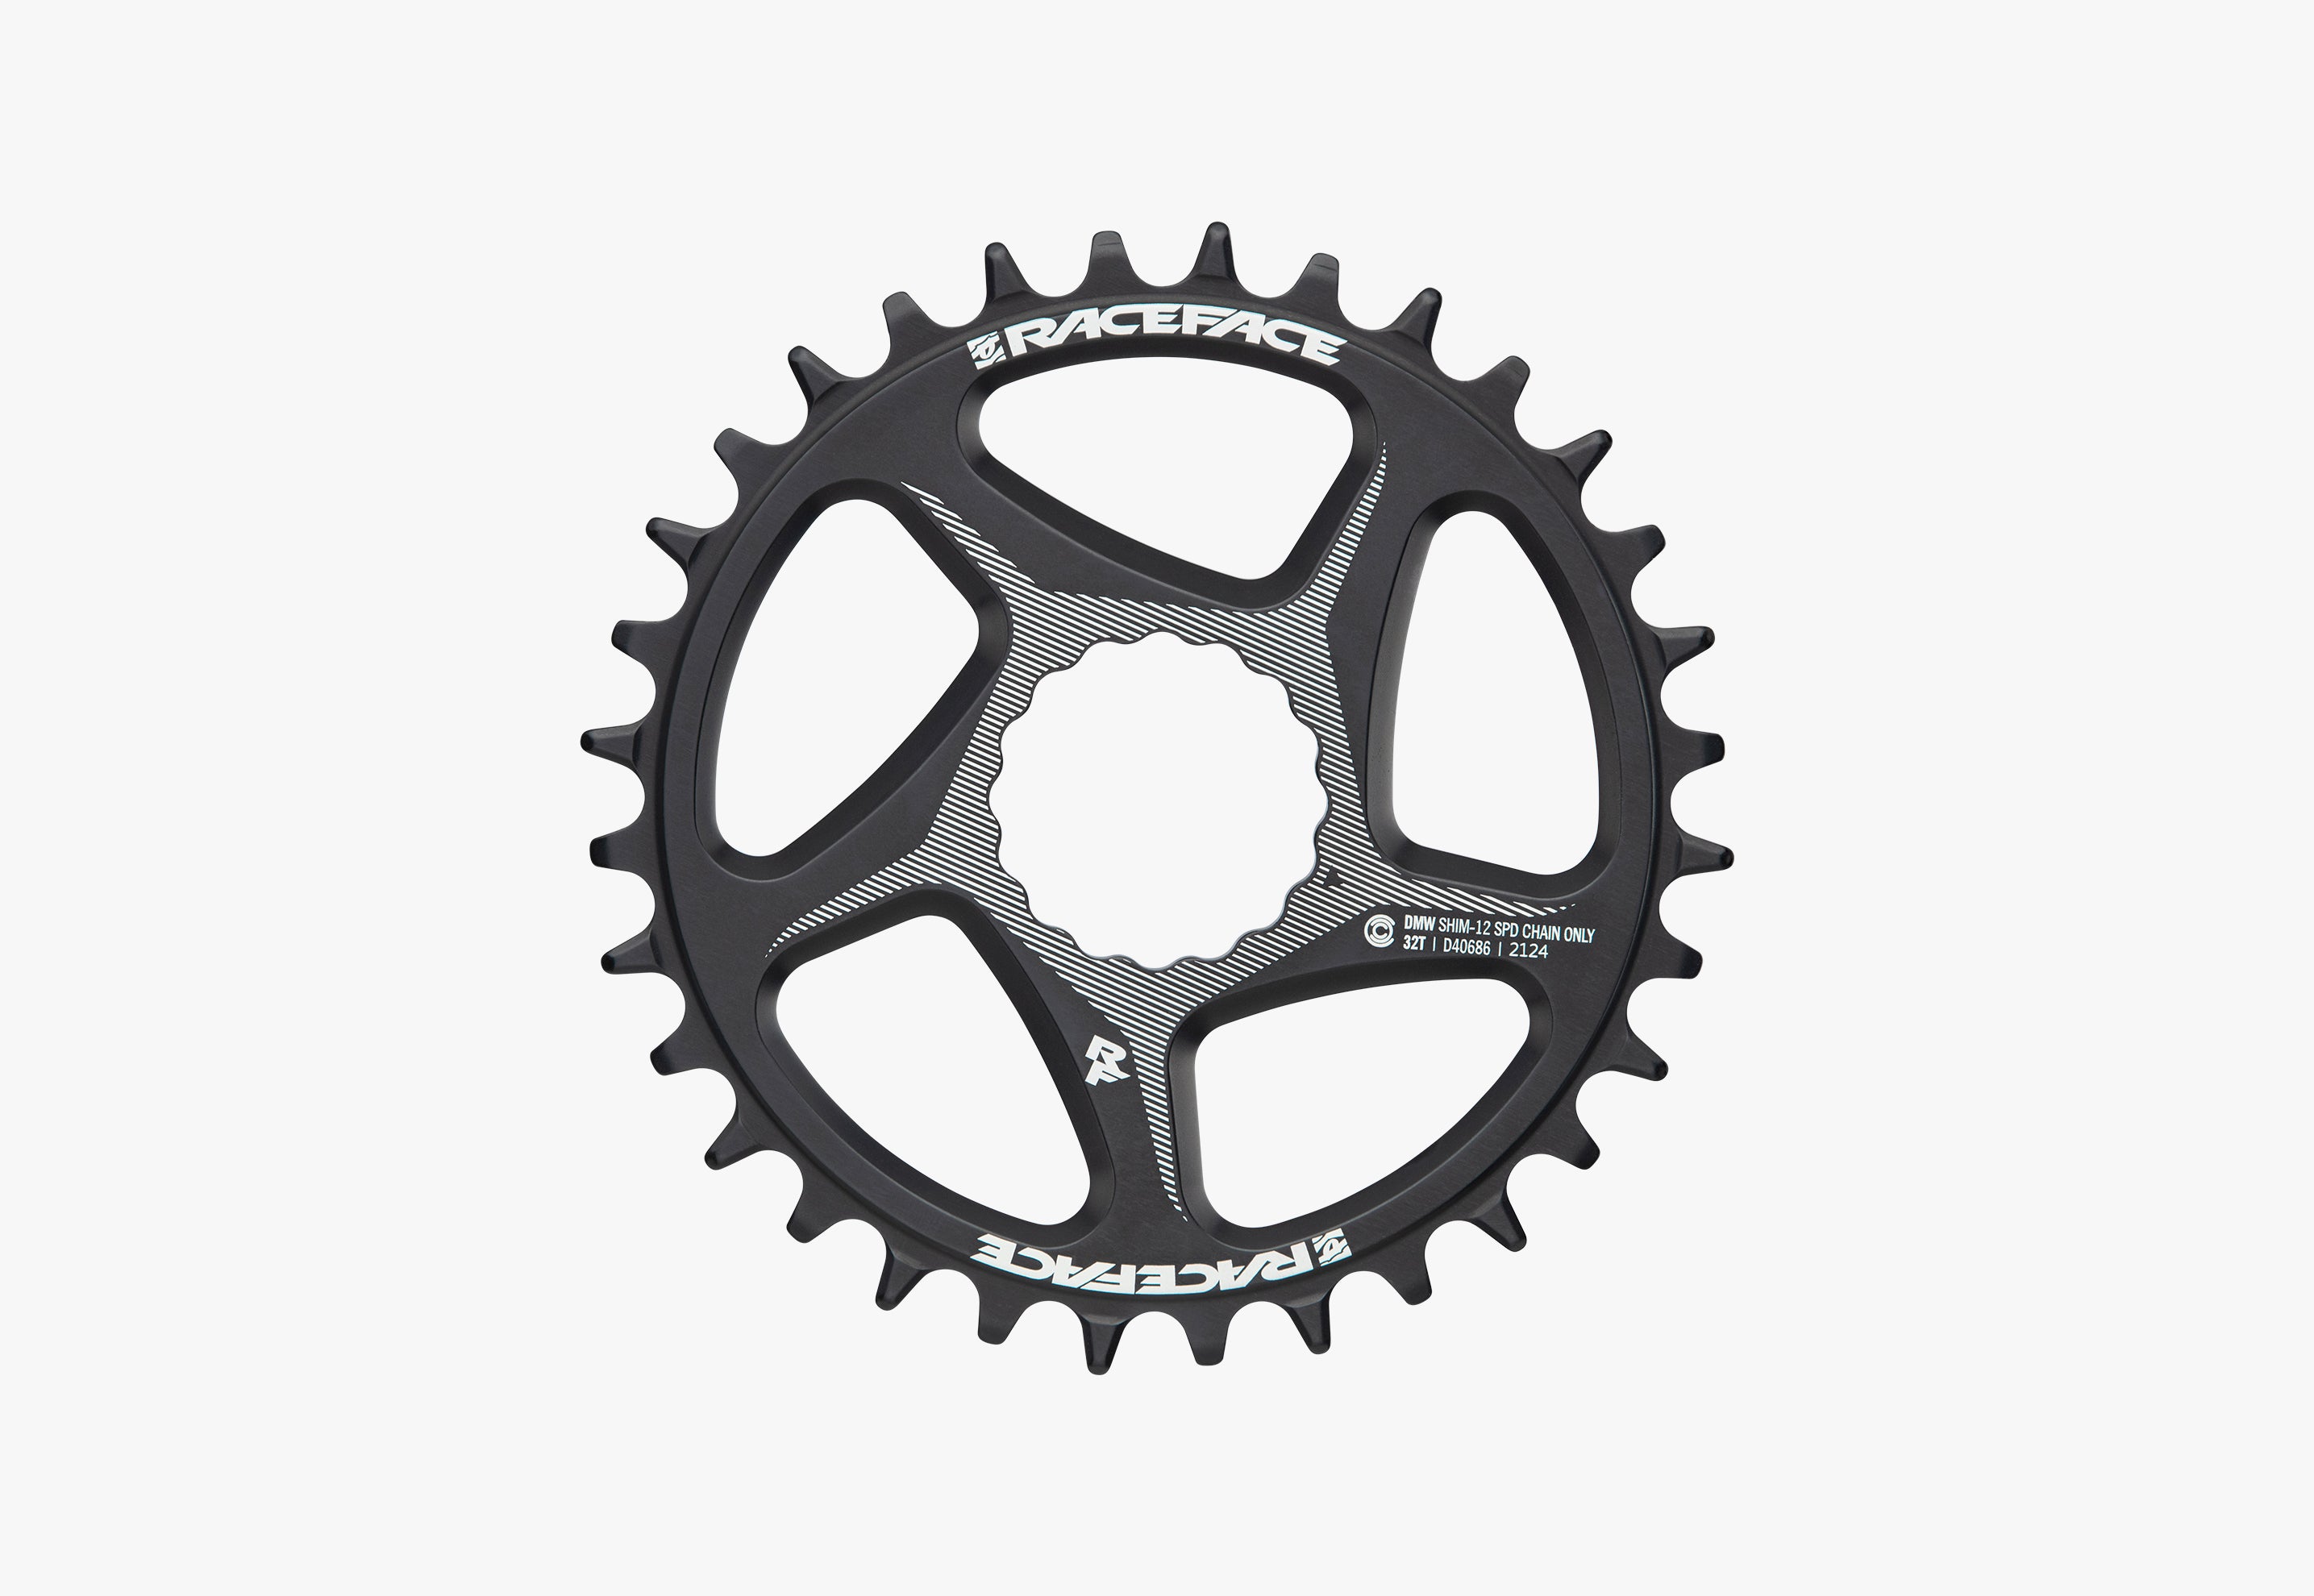 1x Chainring, Cinch Direct Mount Wide - SHI 12